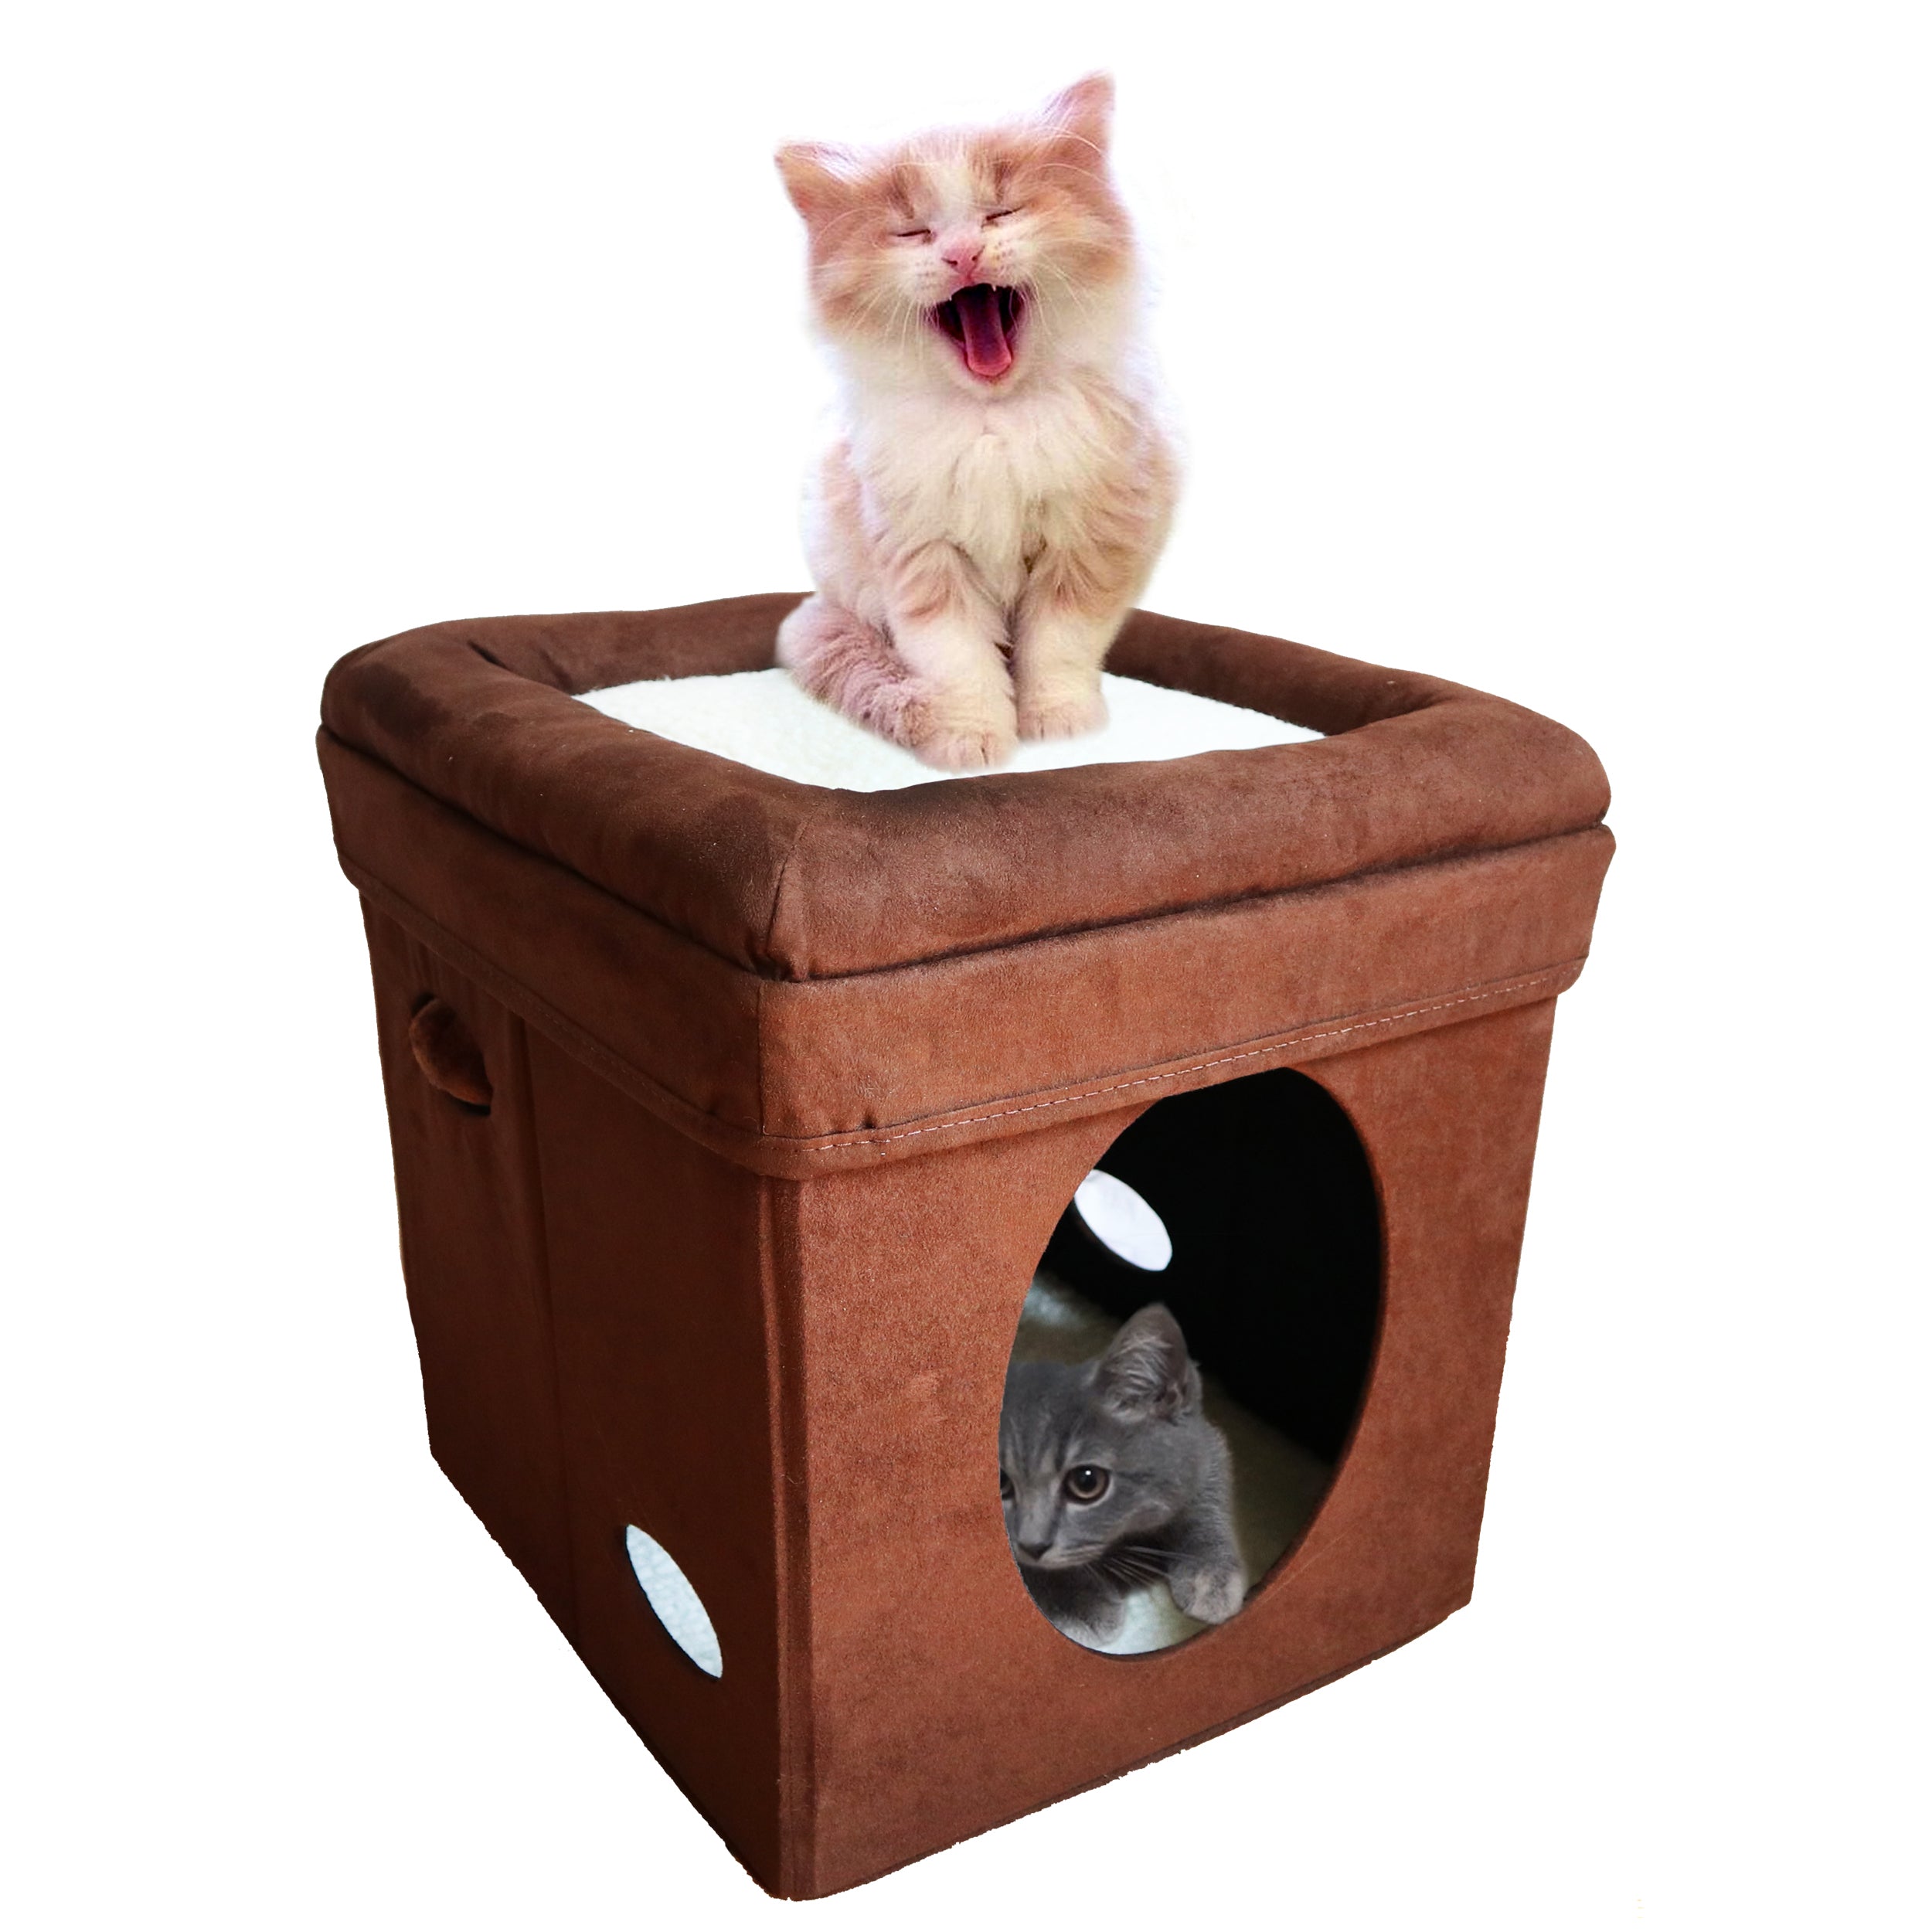 [Cat Bed] Feline Nuvo Midwest Curious Cat Cube Interactive Play Box